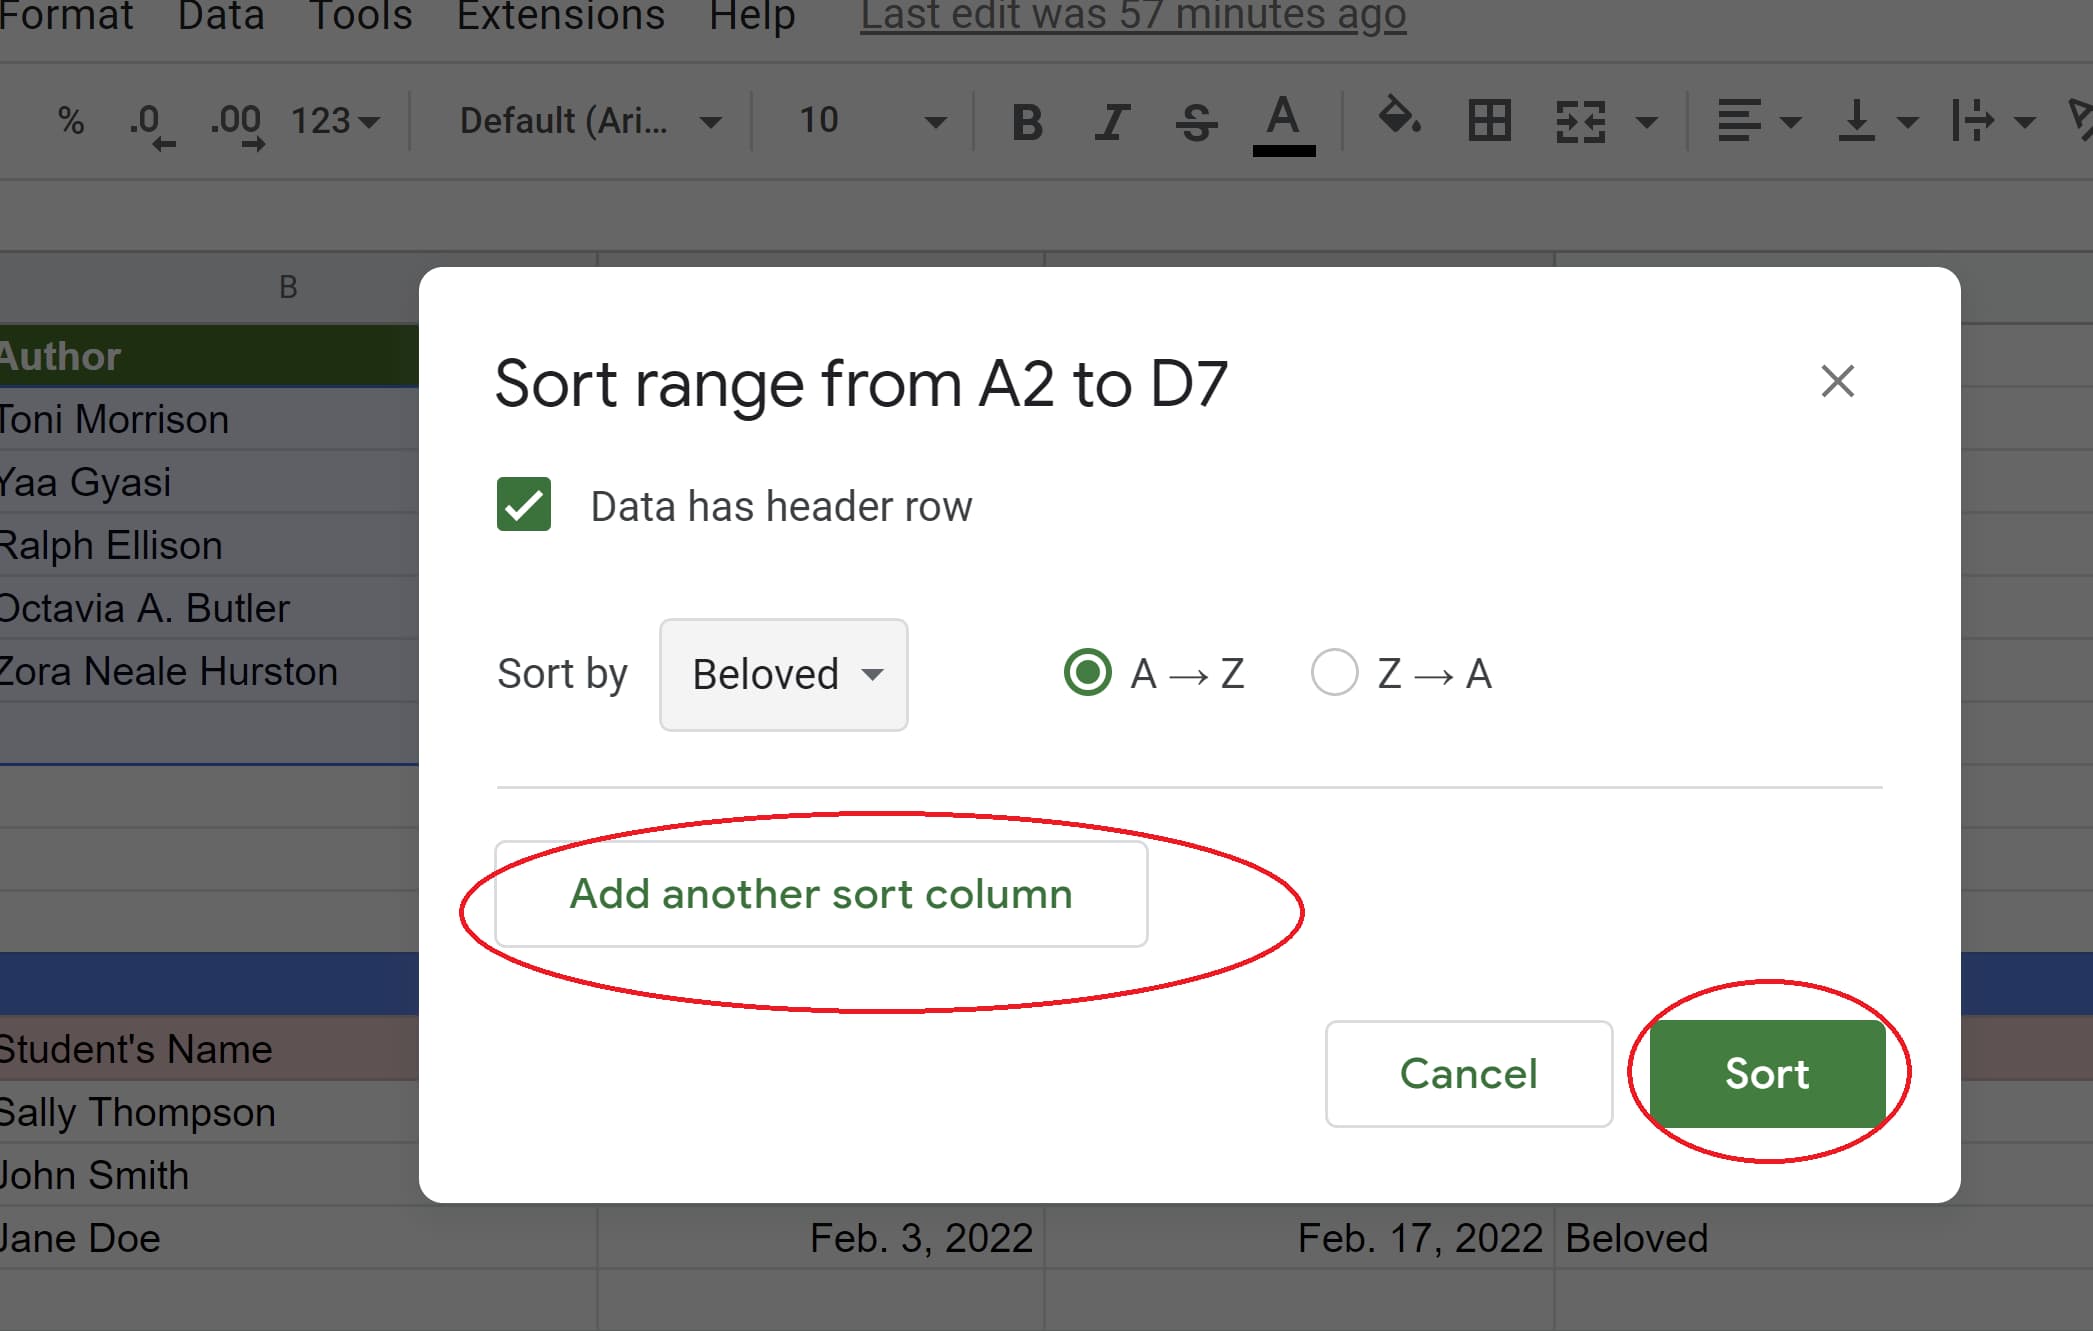 Add another sort column and Sort button pictured in Google Sheets